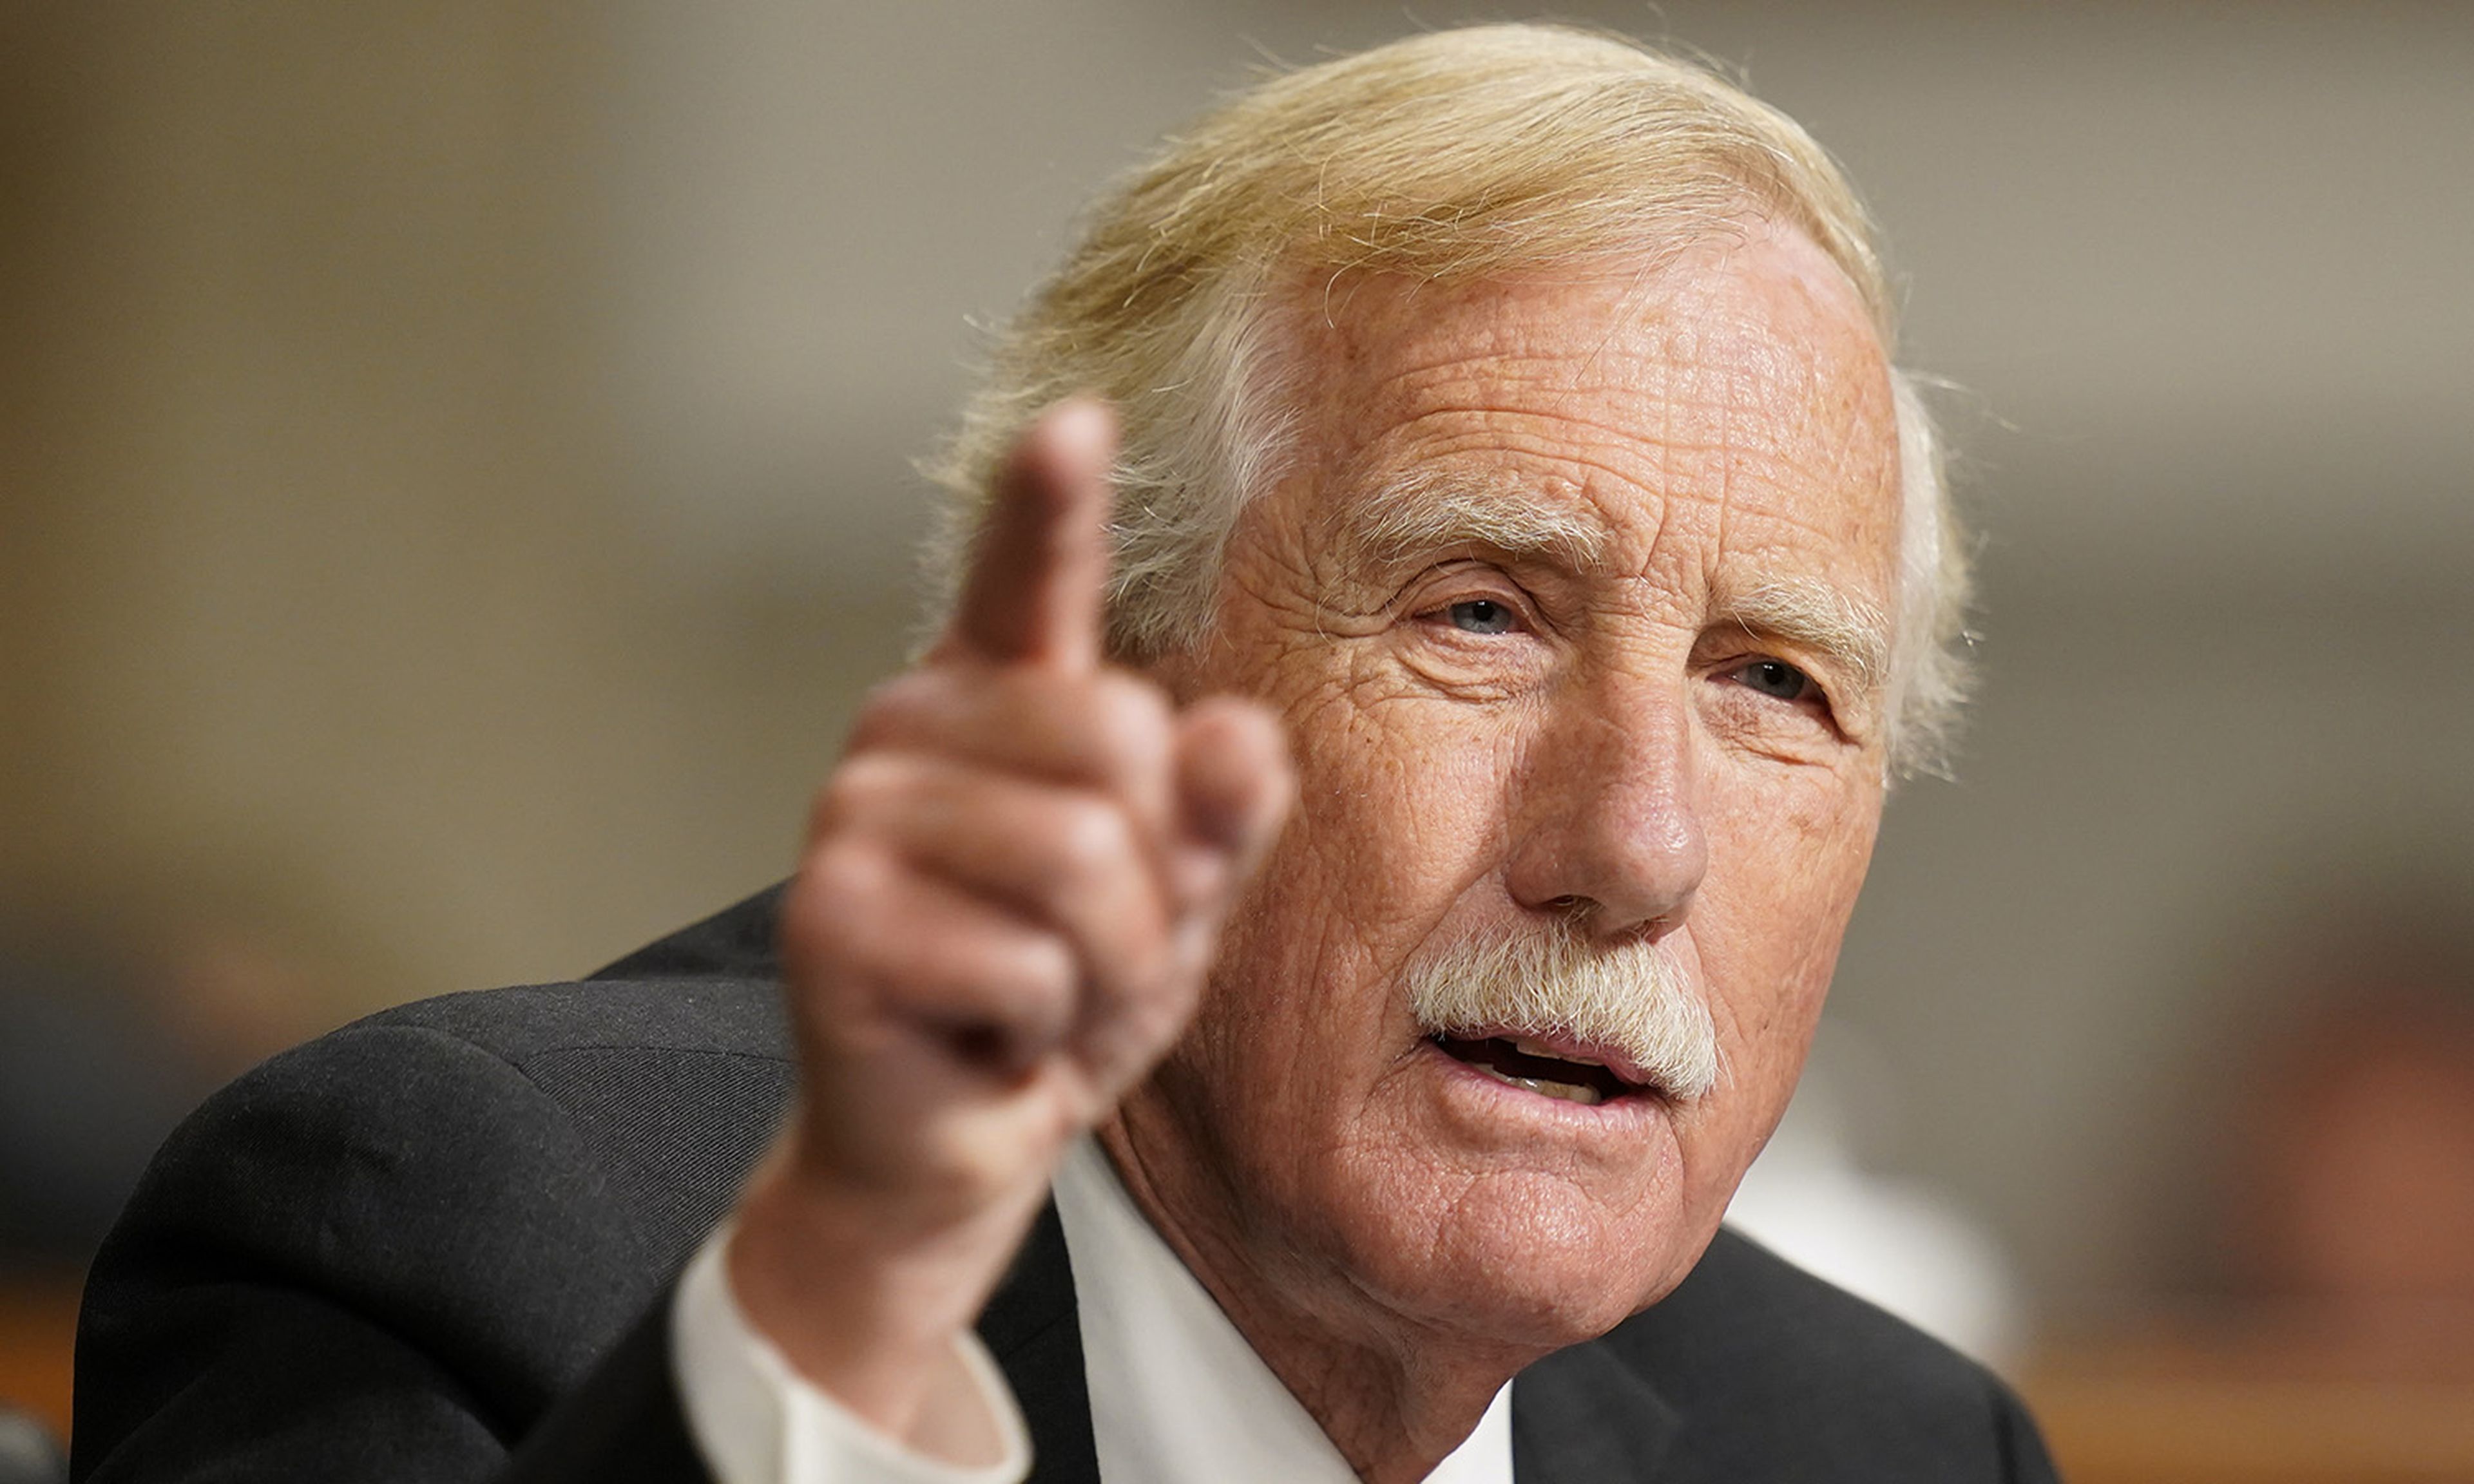 Sen. Angus King, I-Maine, speaks during a Senate Armed Services Committee hearing on Capitol Hill on Sept. 28, 2021, in Washington. Two dozen senators want to know more about how agencies are protecting the federal government and critical infrastructure. (Photo by Patrick Semansky/Pool via Getty Images)